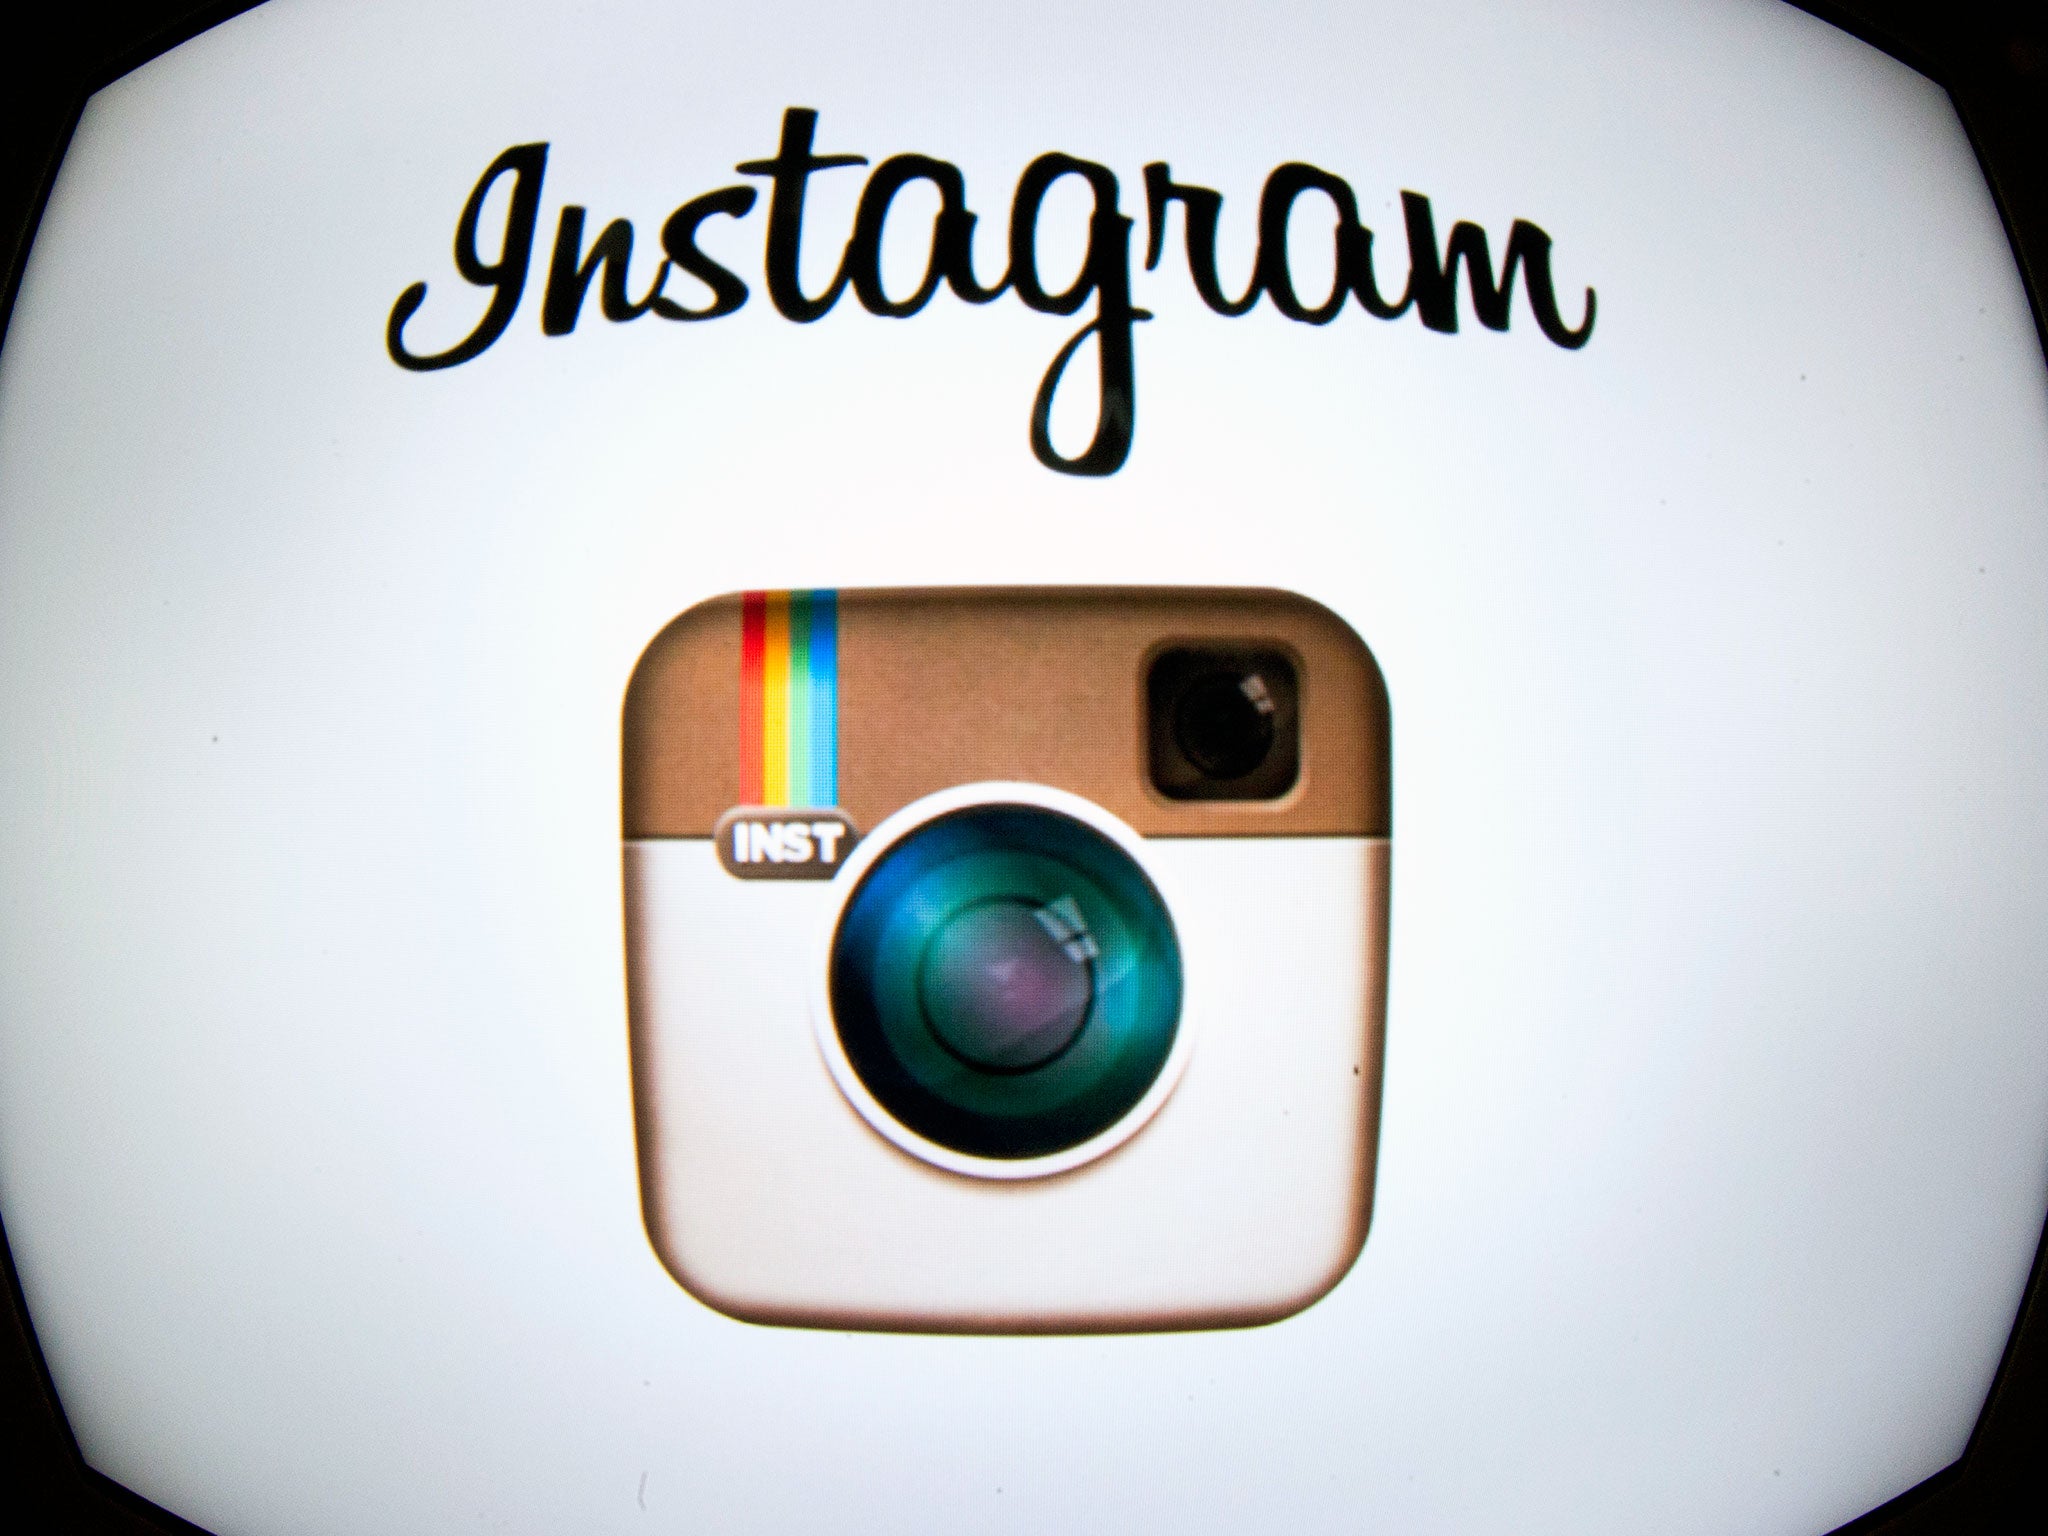 Instagram with 300 million-strong user base